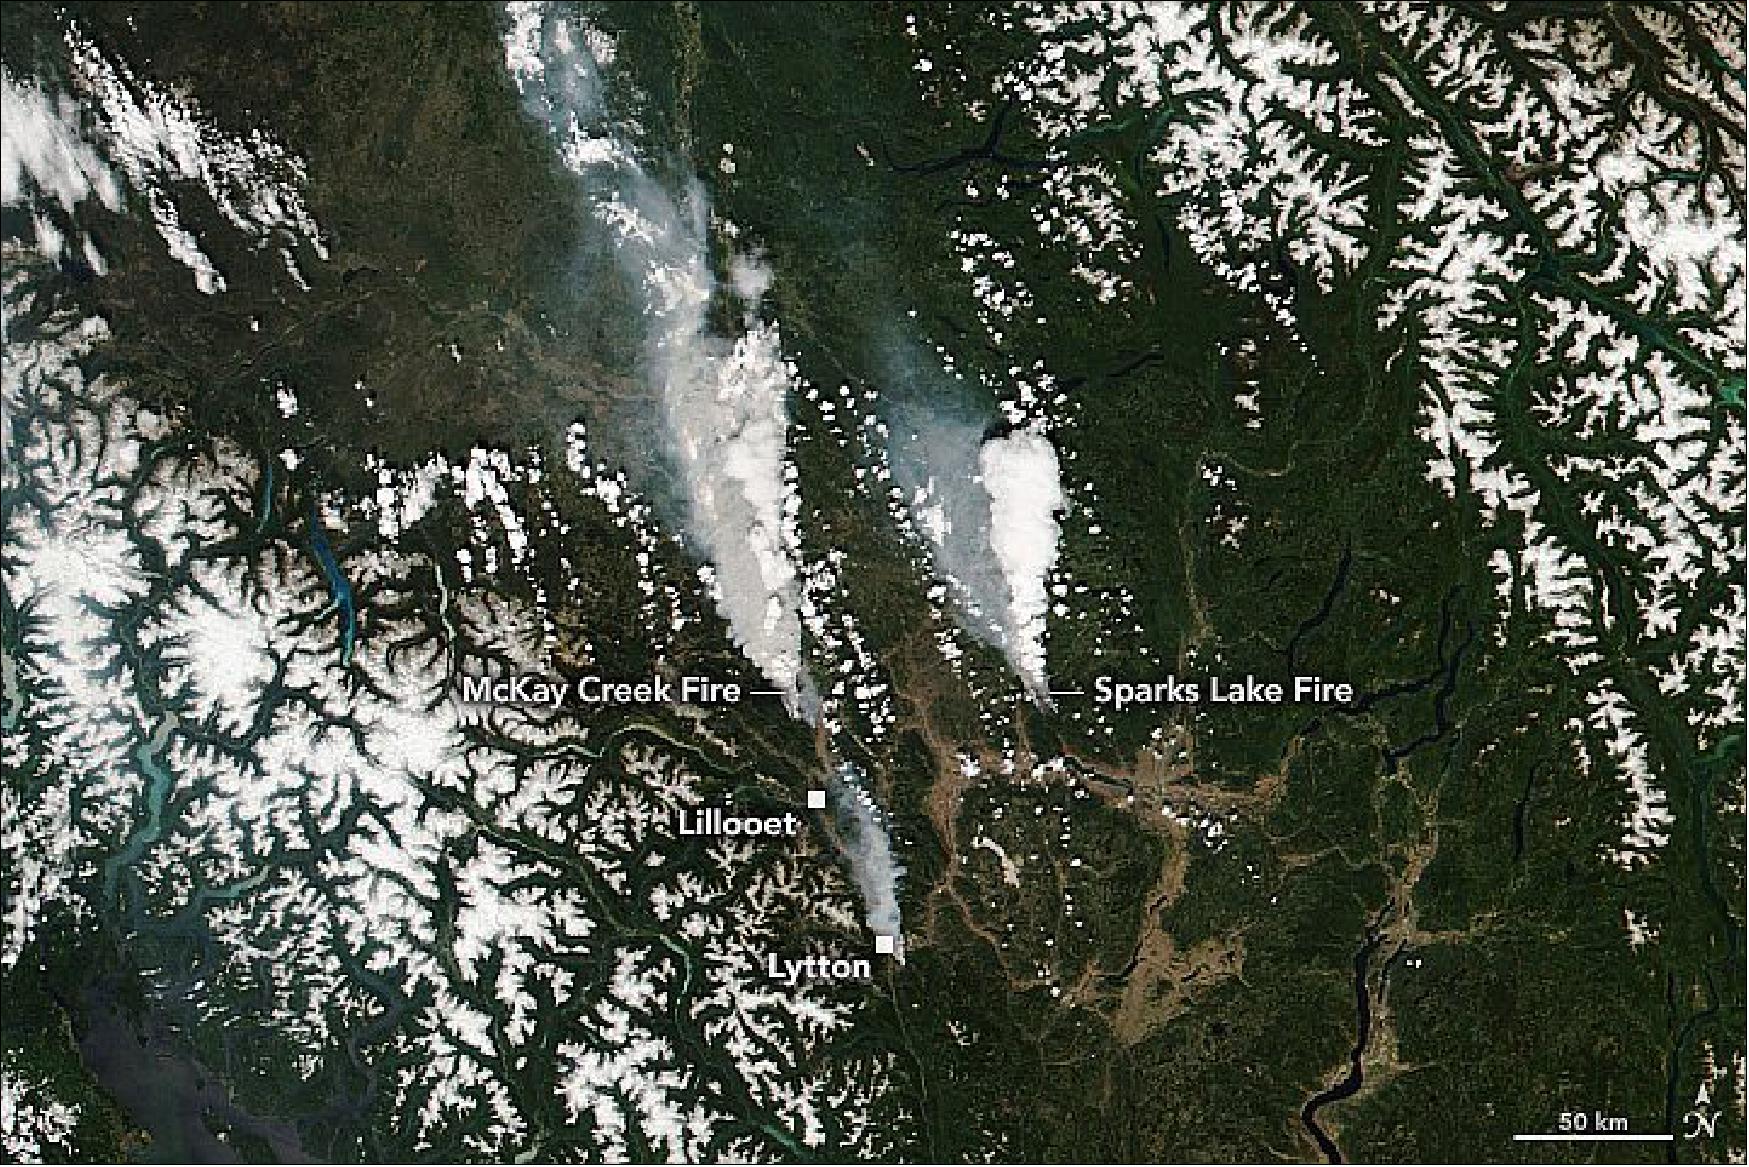 Figure 27: VIIRS (Visible Infrared Imaging Radiometer Suite) on the NOAA-20 satellite acquired this image around 2 p.m. local time (21:00 Universal Time) on June 30, 2021. By the morning of July 1, the McKay Creek fire (left) and the Sparks Lake fire (right) had burned an estimated 150 and 200 km2 (60 and 75 square miles), respectively. A smaller fire is visible just south of the town of Lytton (image credit: NASA Earth Observatory images by Lauren Dauphin and Joshua Stevens, using VIIRS data from NASA EOSDIS LANCE, GIBS/Worldview, and the Suomi National Polar-orbiting Partnership, Landsat data from the U.S. Geological Survey, and GEOS-5 data from the Global Modeling and Assimilation Office at NASA GSFC. Story by Kathryn Hansen)